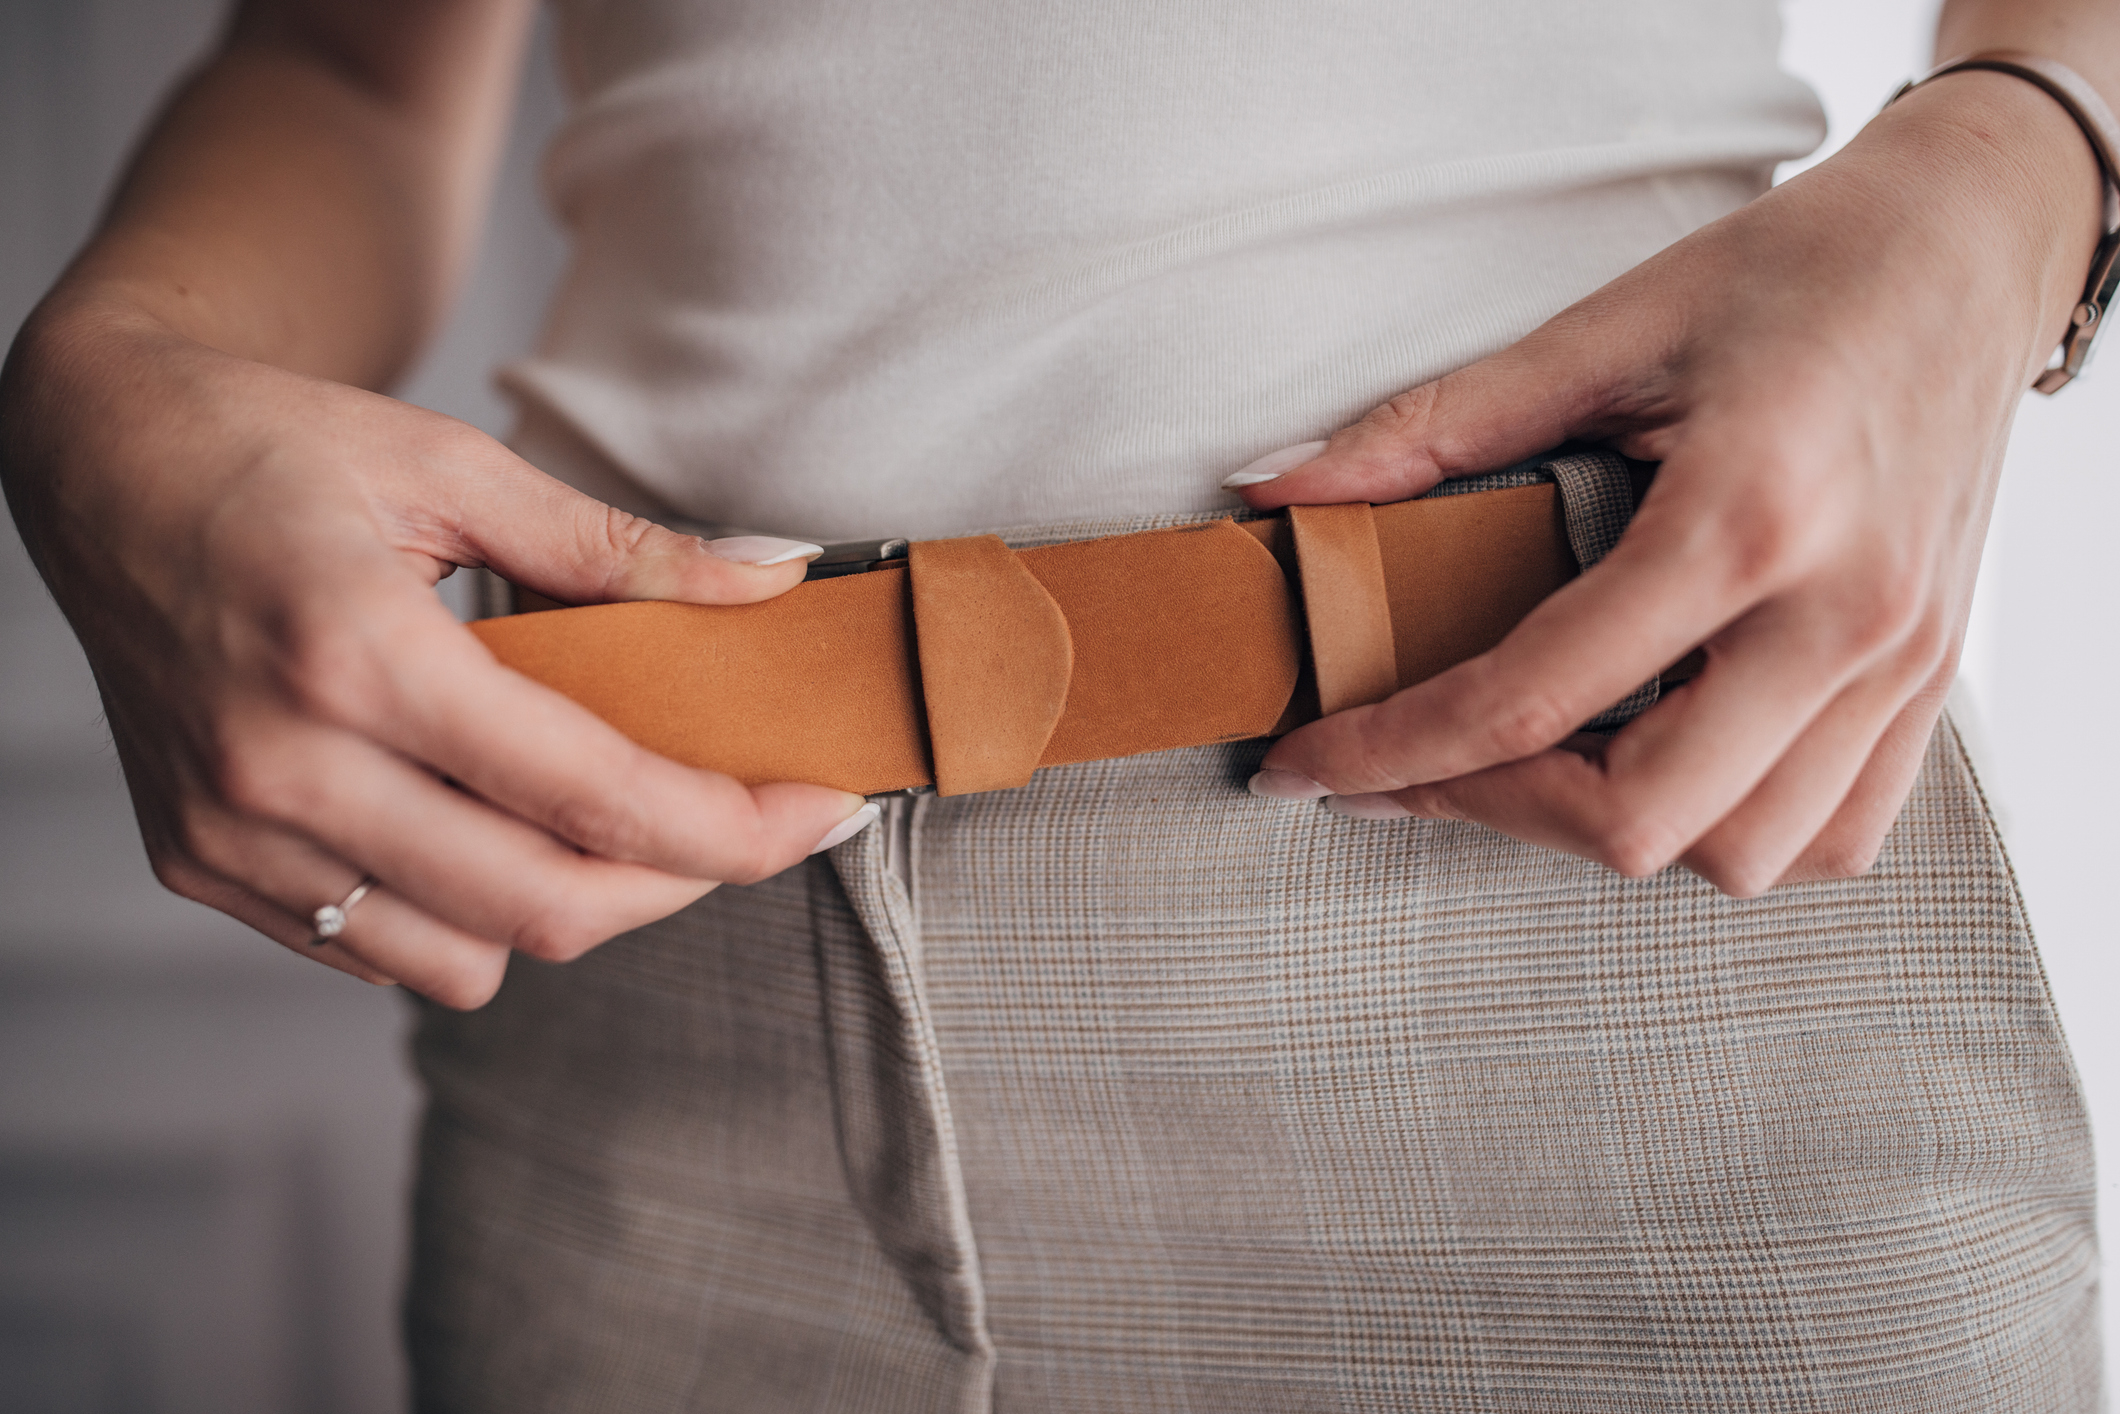 Person fastening a brown leather belt on gray trousers, symbolizing budget tightening or financial planning